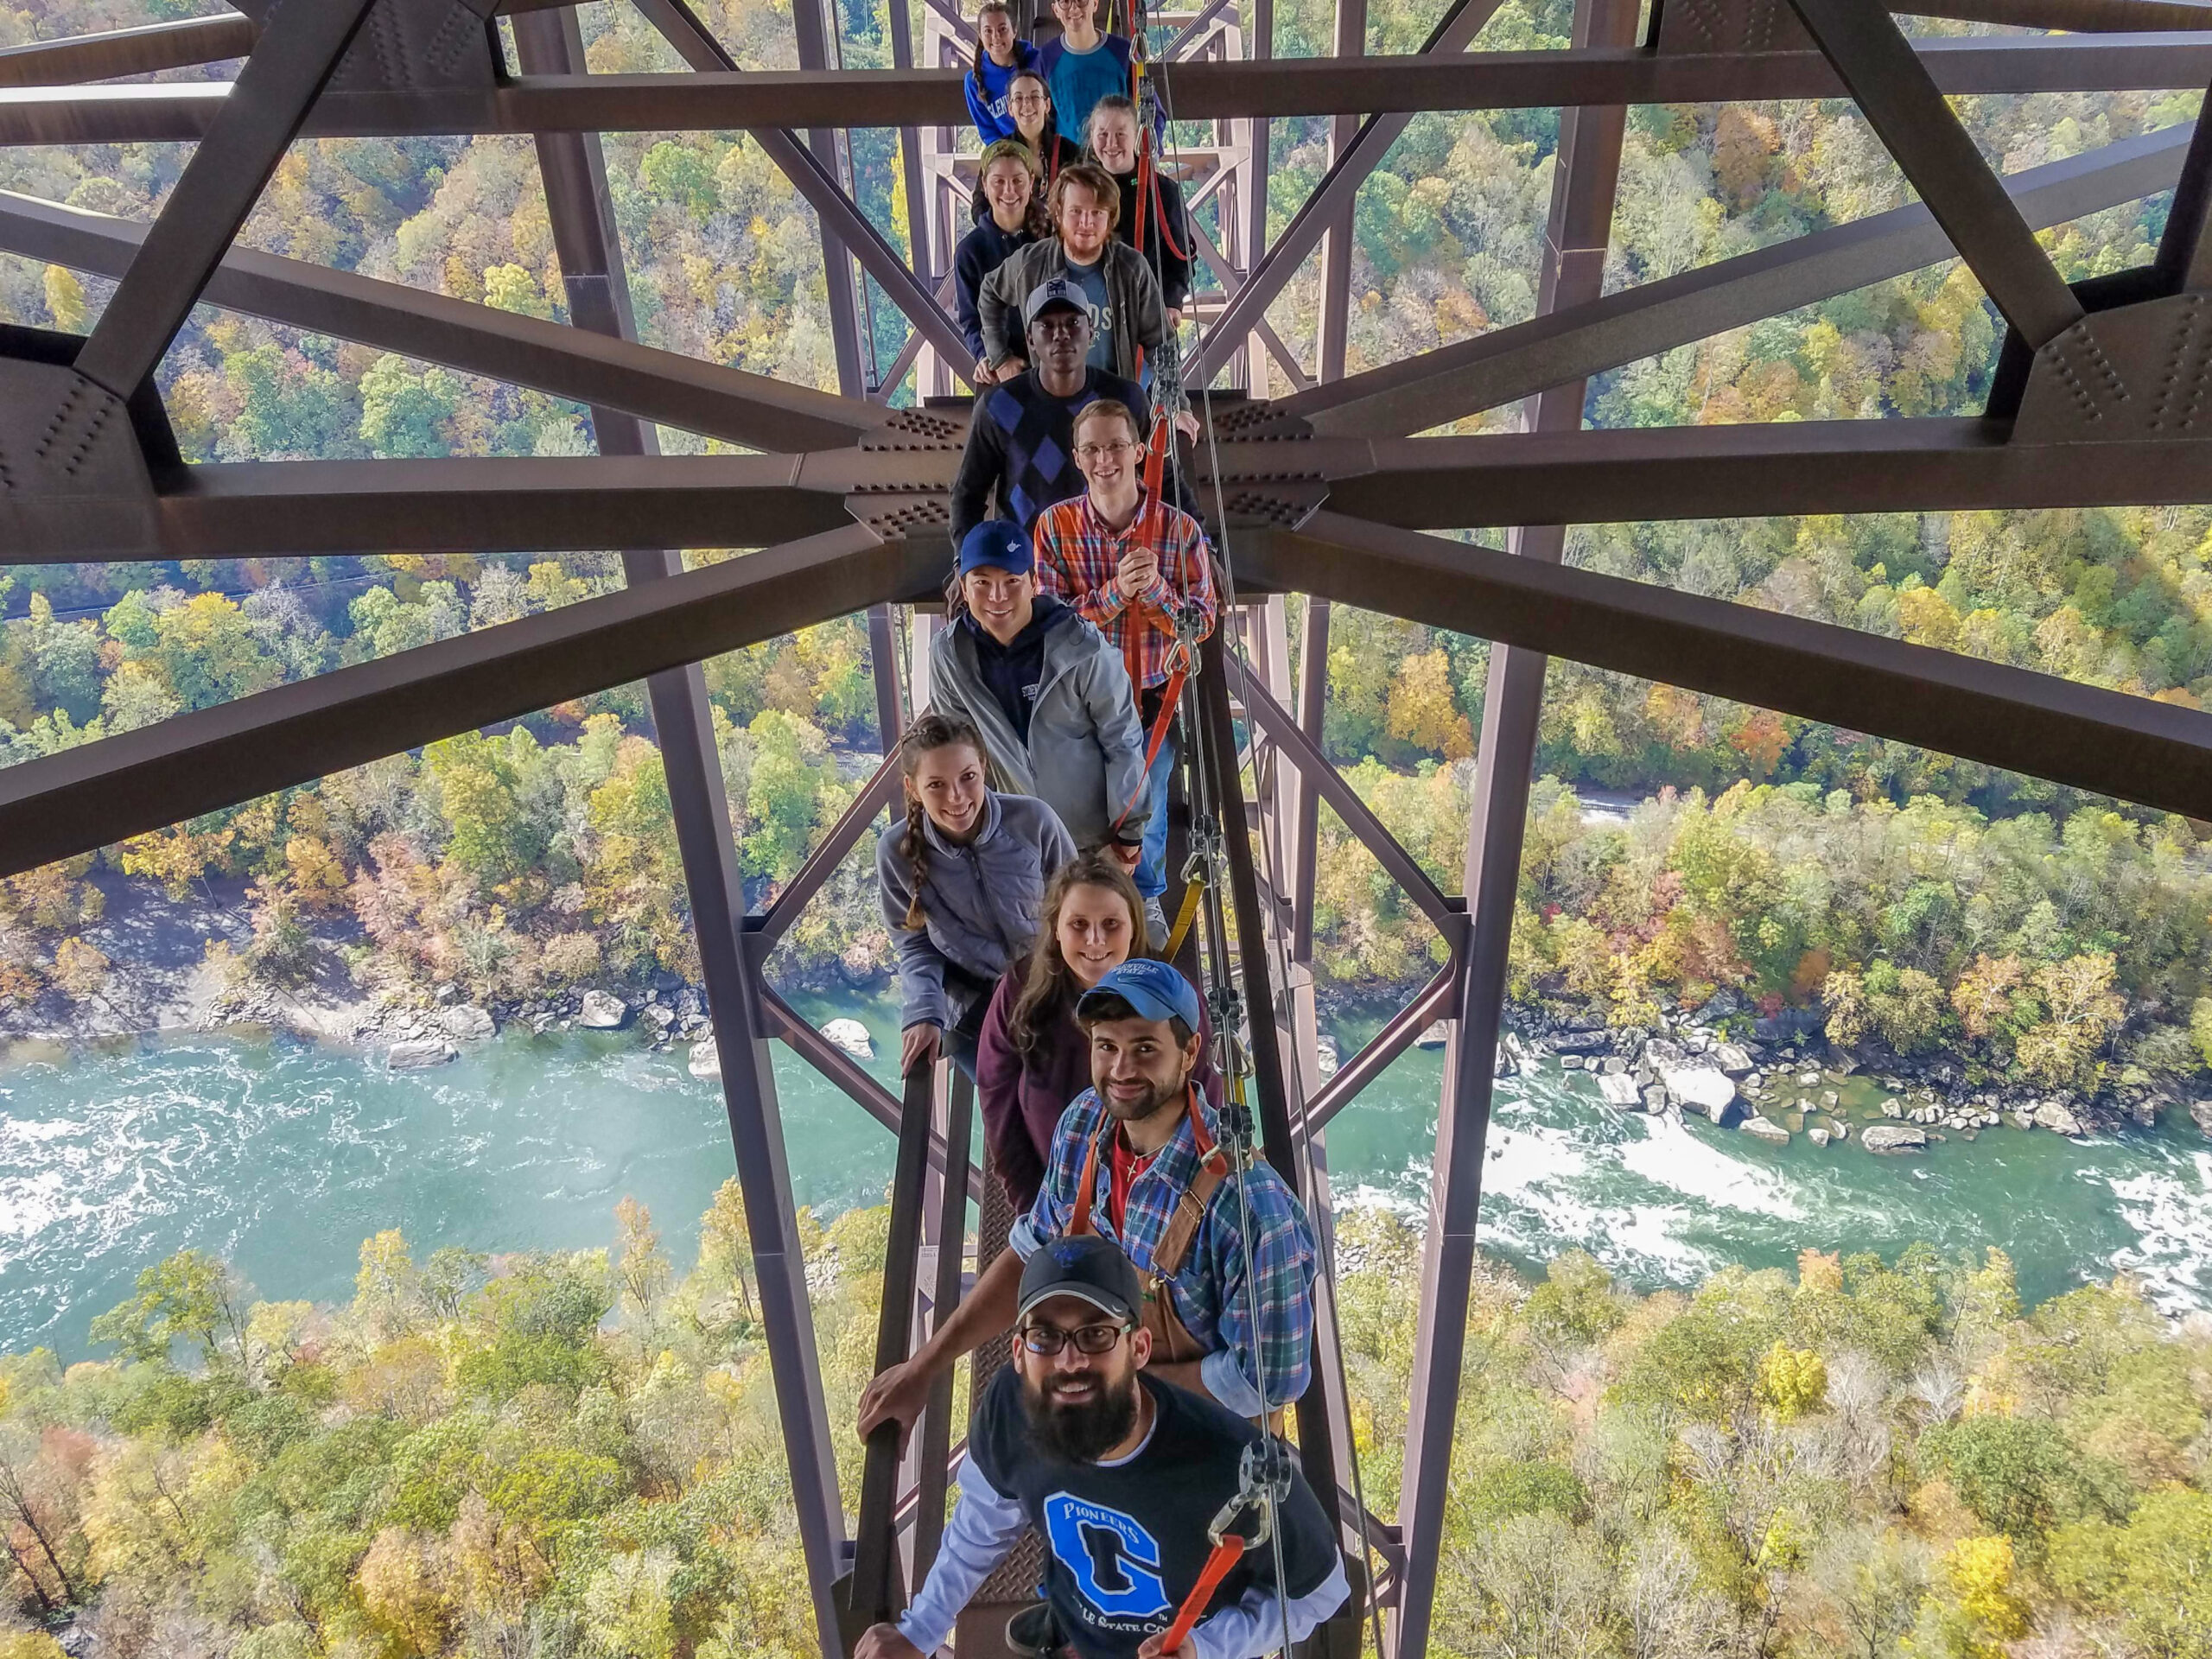 Image: Smiling Glenville State College students pose for a photo on the New River Gorge Bridge Catwalk, a walkway running beneath the bridge. Far below, you can see the New River.